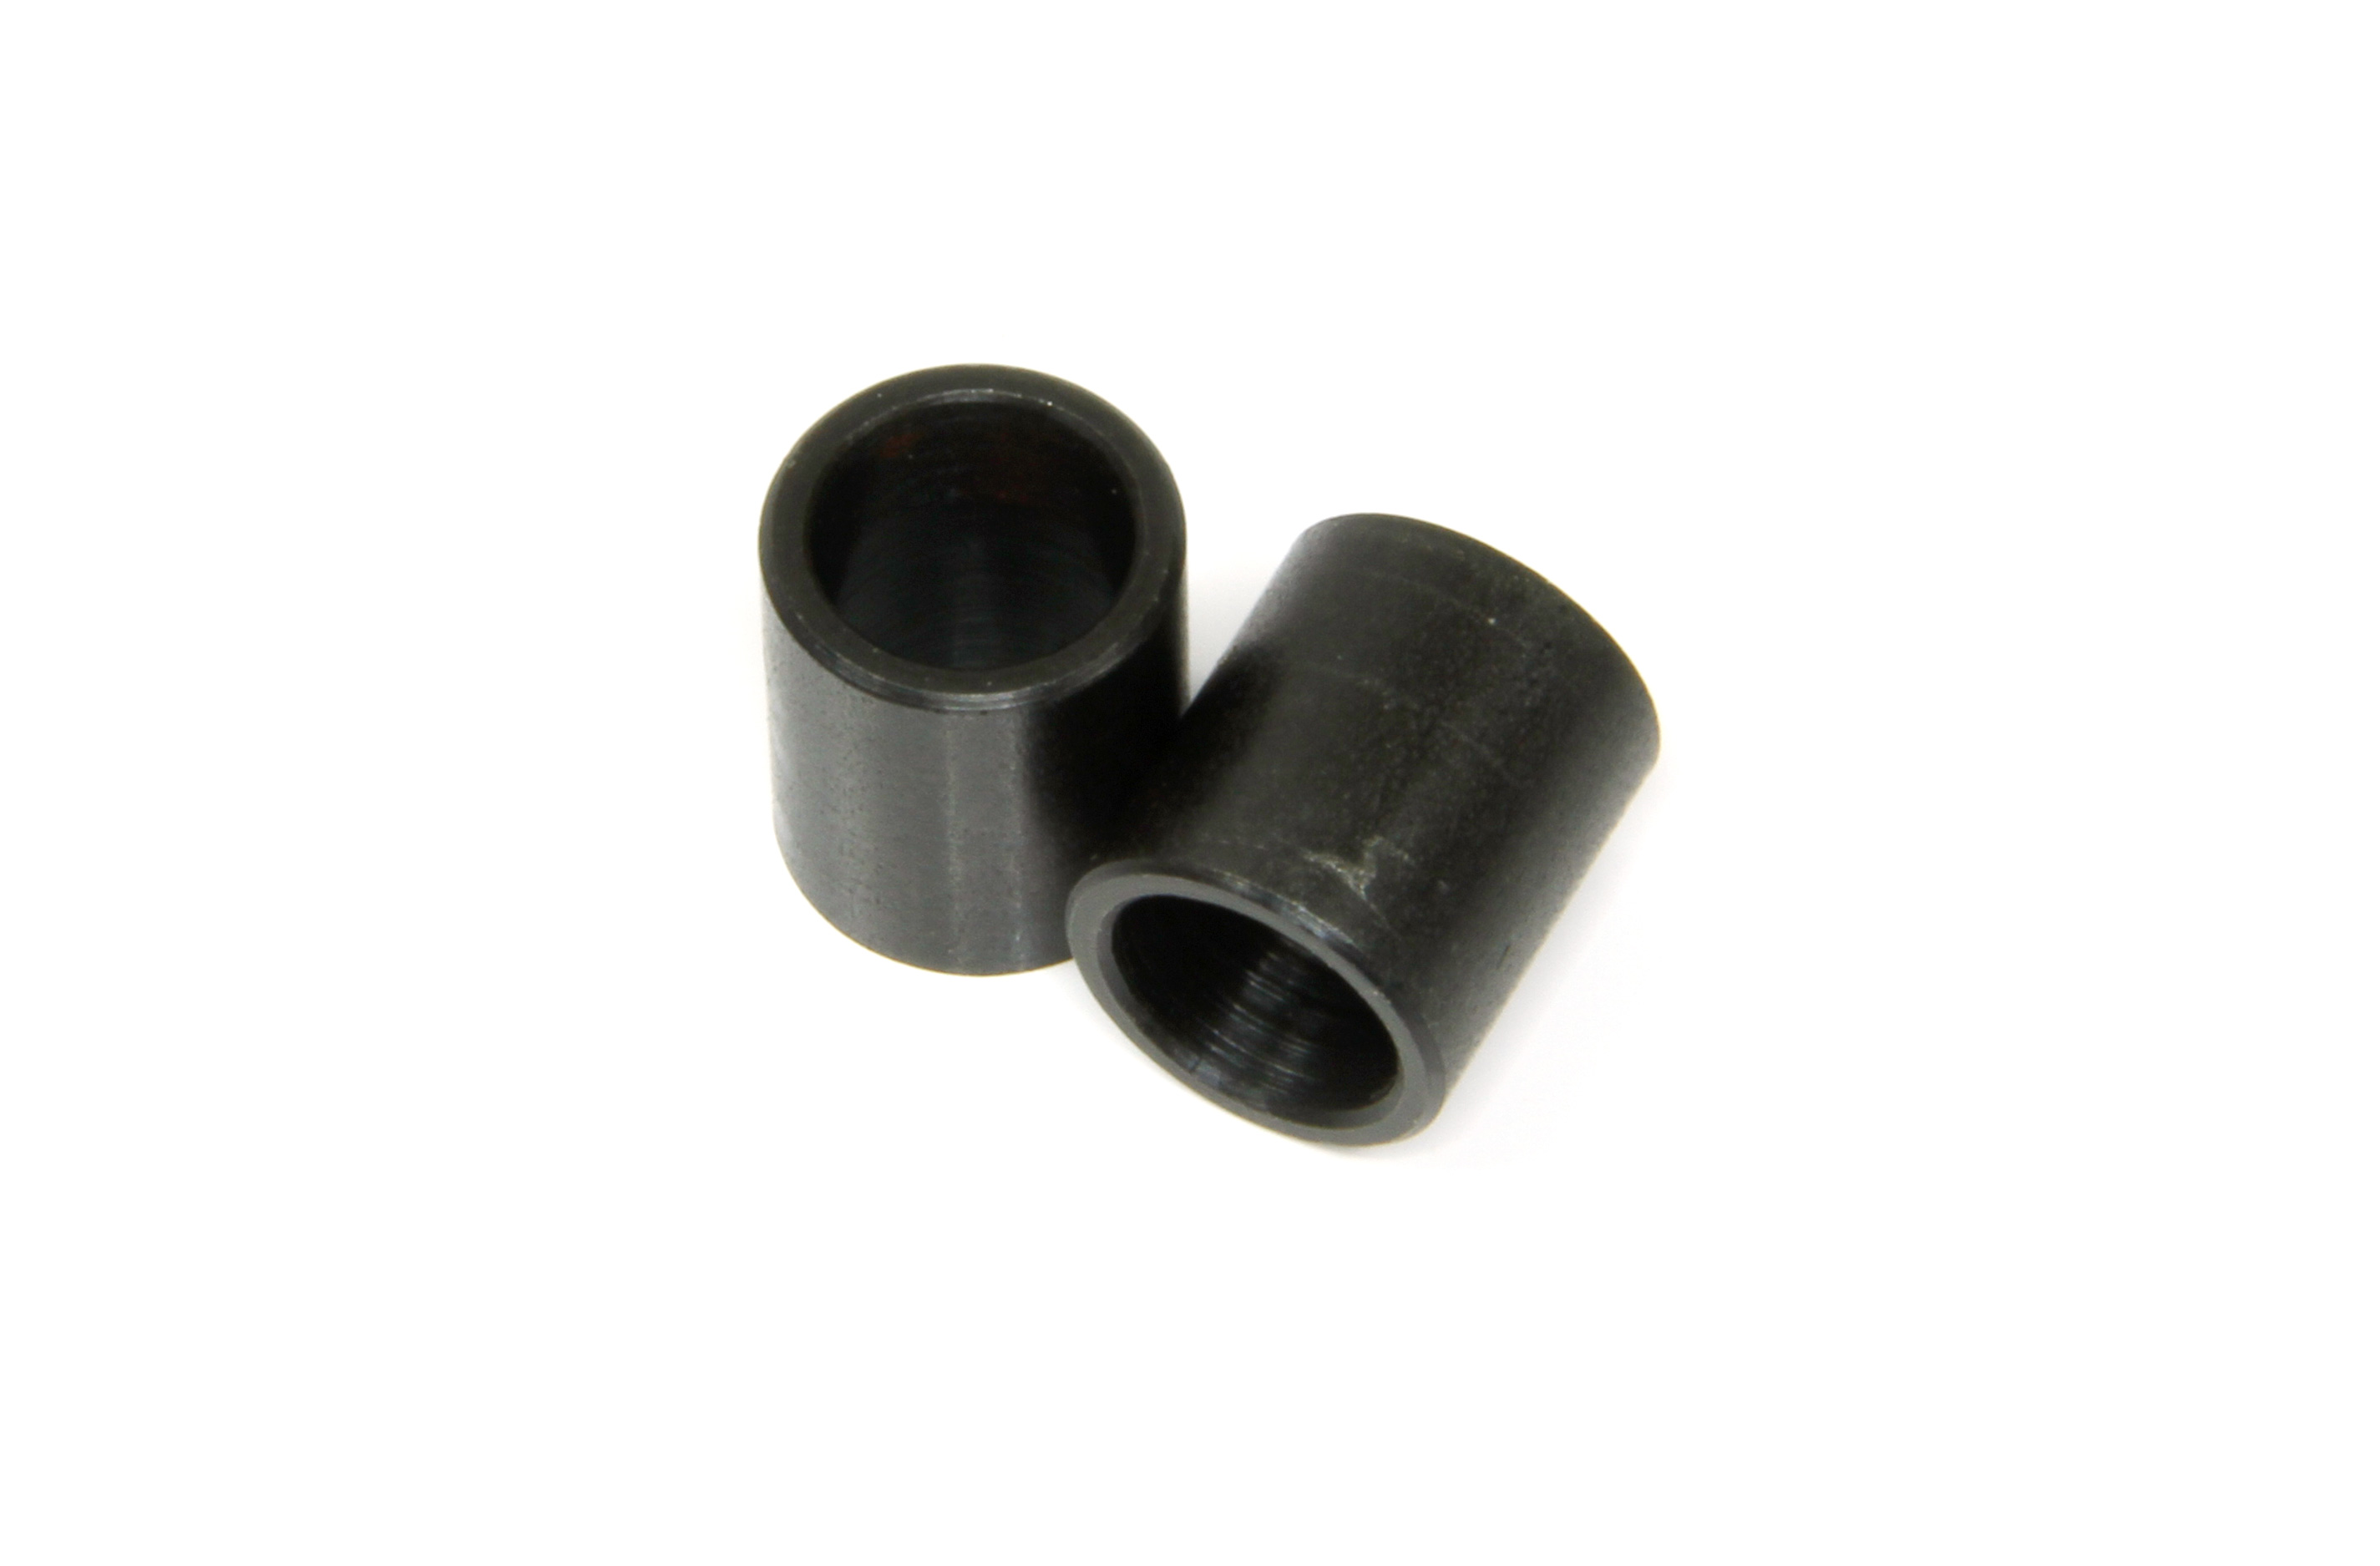 2012-120 Mecatech Spacer for Rear Upright Bearing